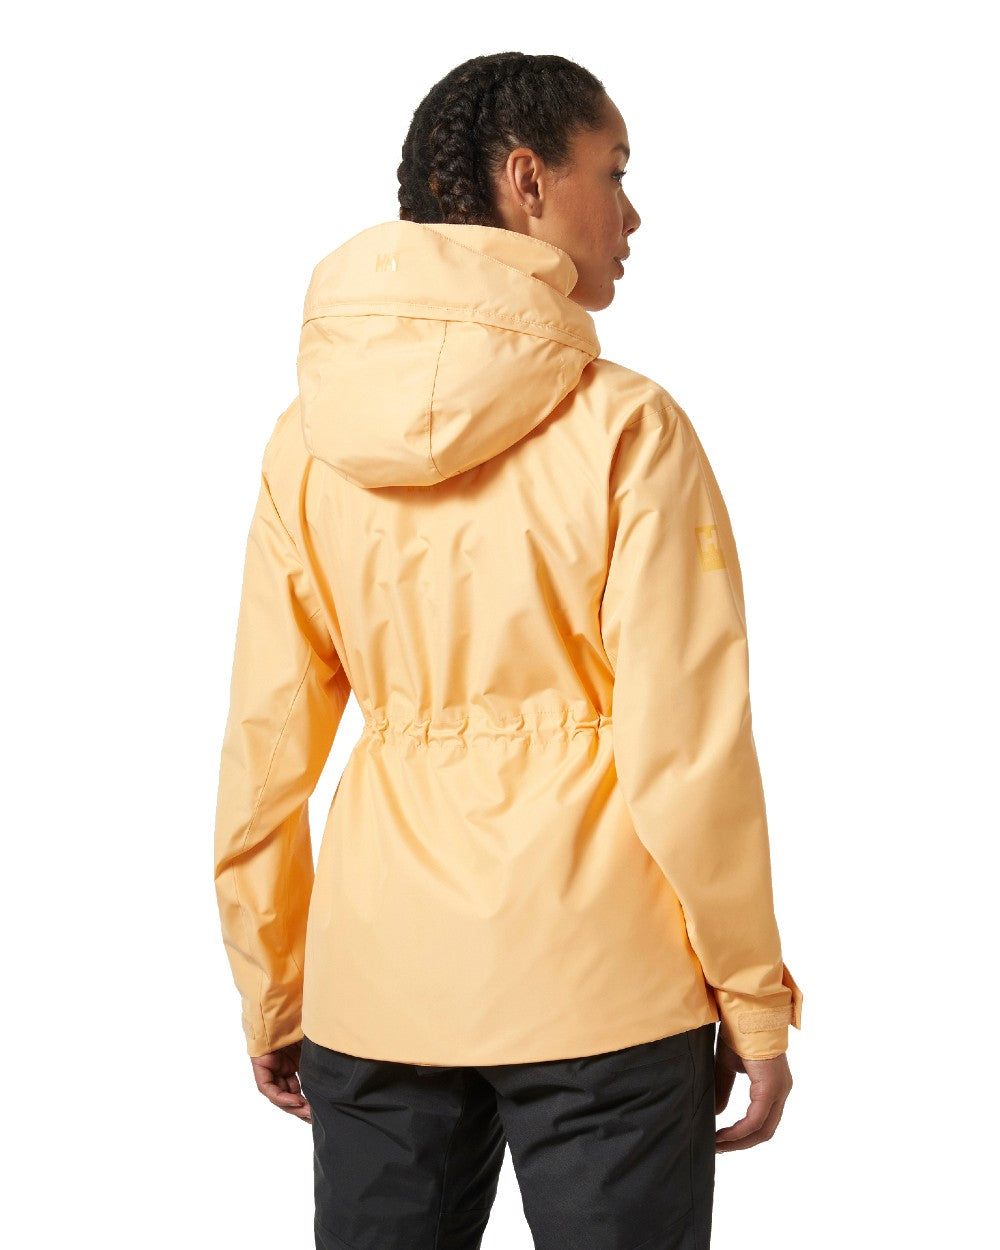 Miami Peach coloured Helly Hansen Womens HP Racing Sailing Jacket 2.0 on white background 